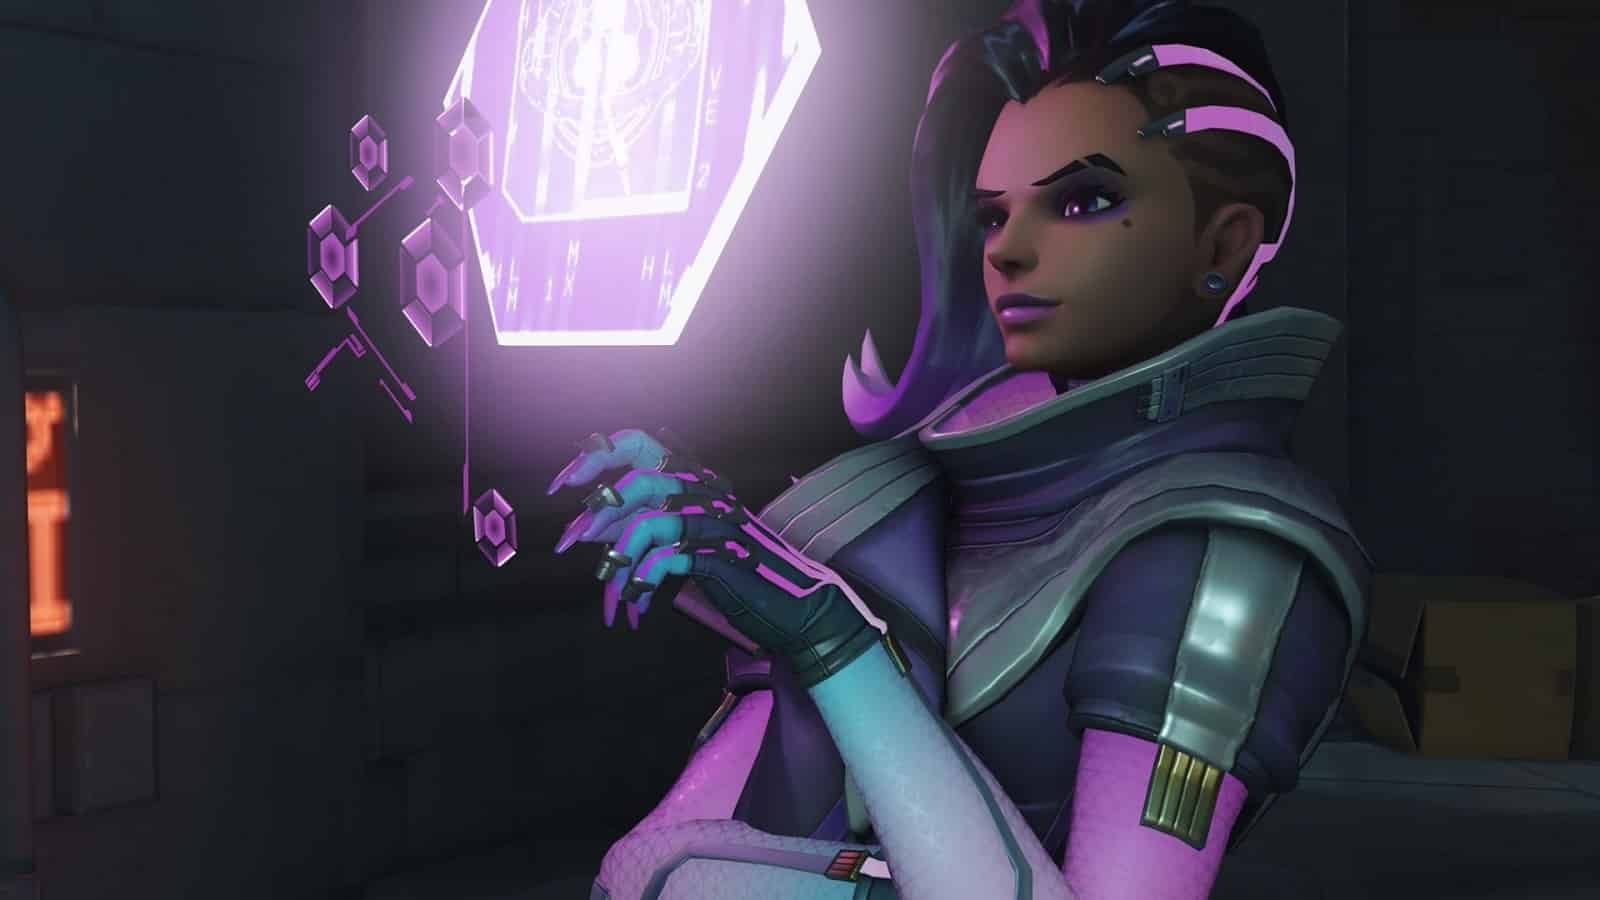 Sombra using her hack ability in Overwatch